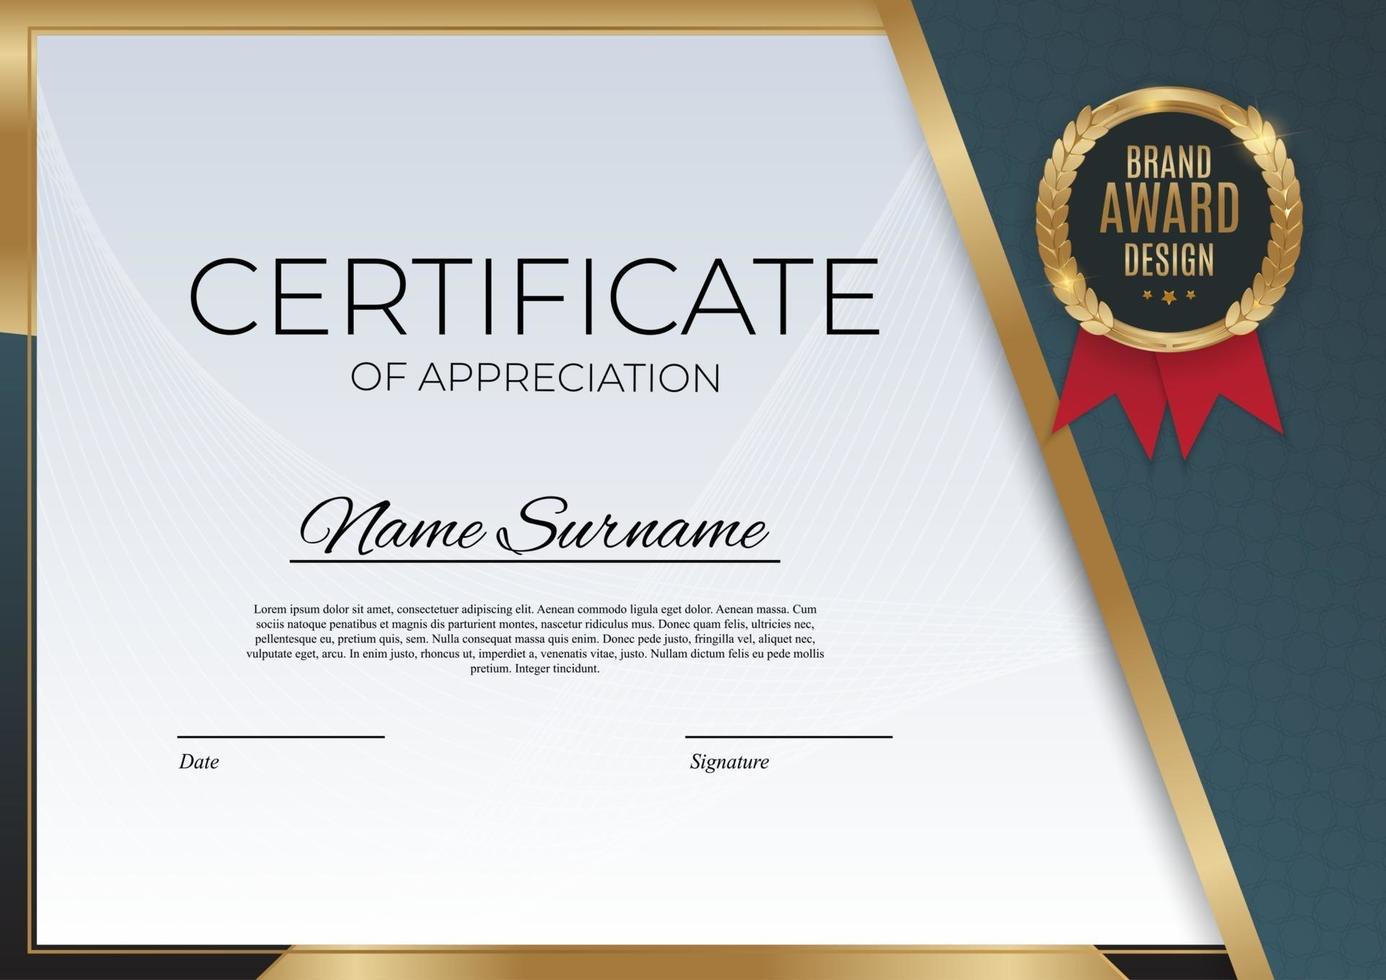 Blue and gold Certificate of achievement template Background with gold badge and border Award diploma design blank vector